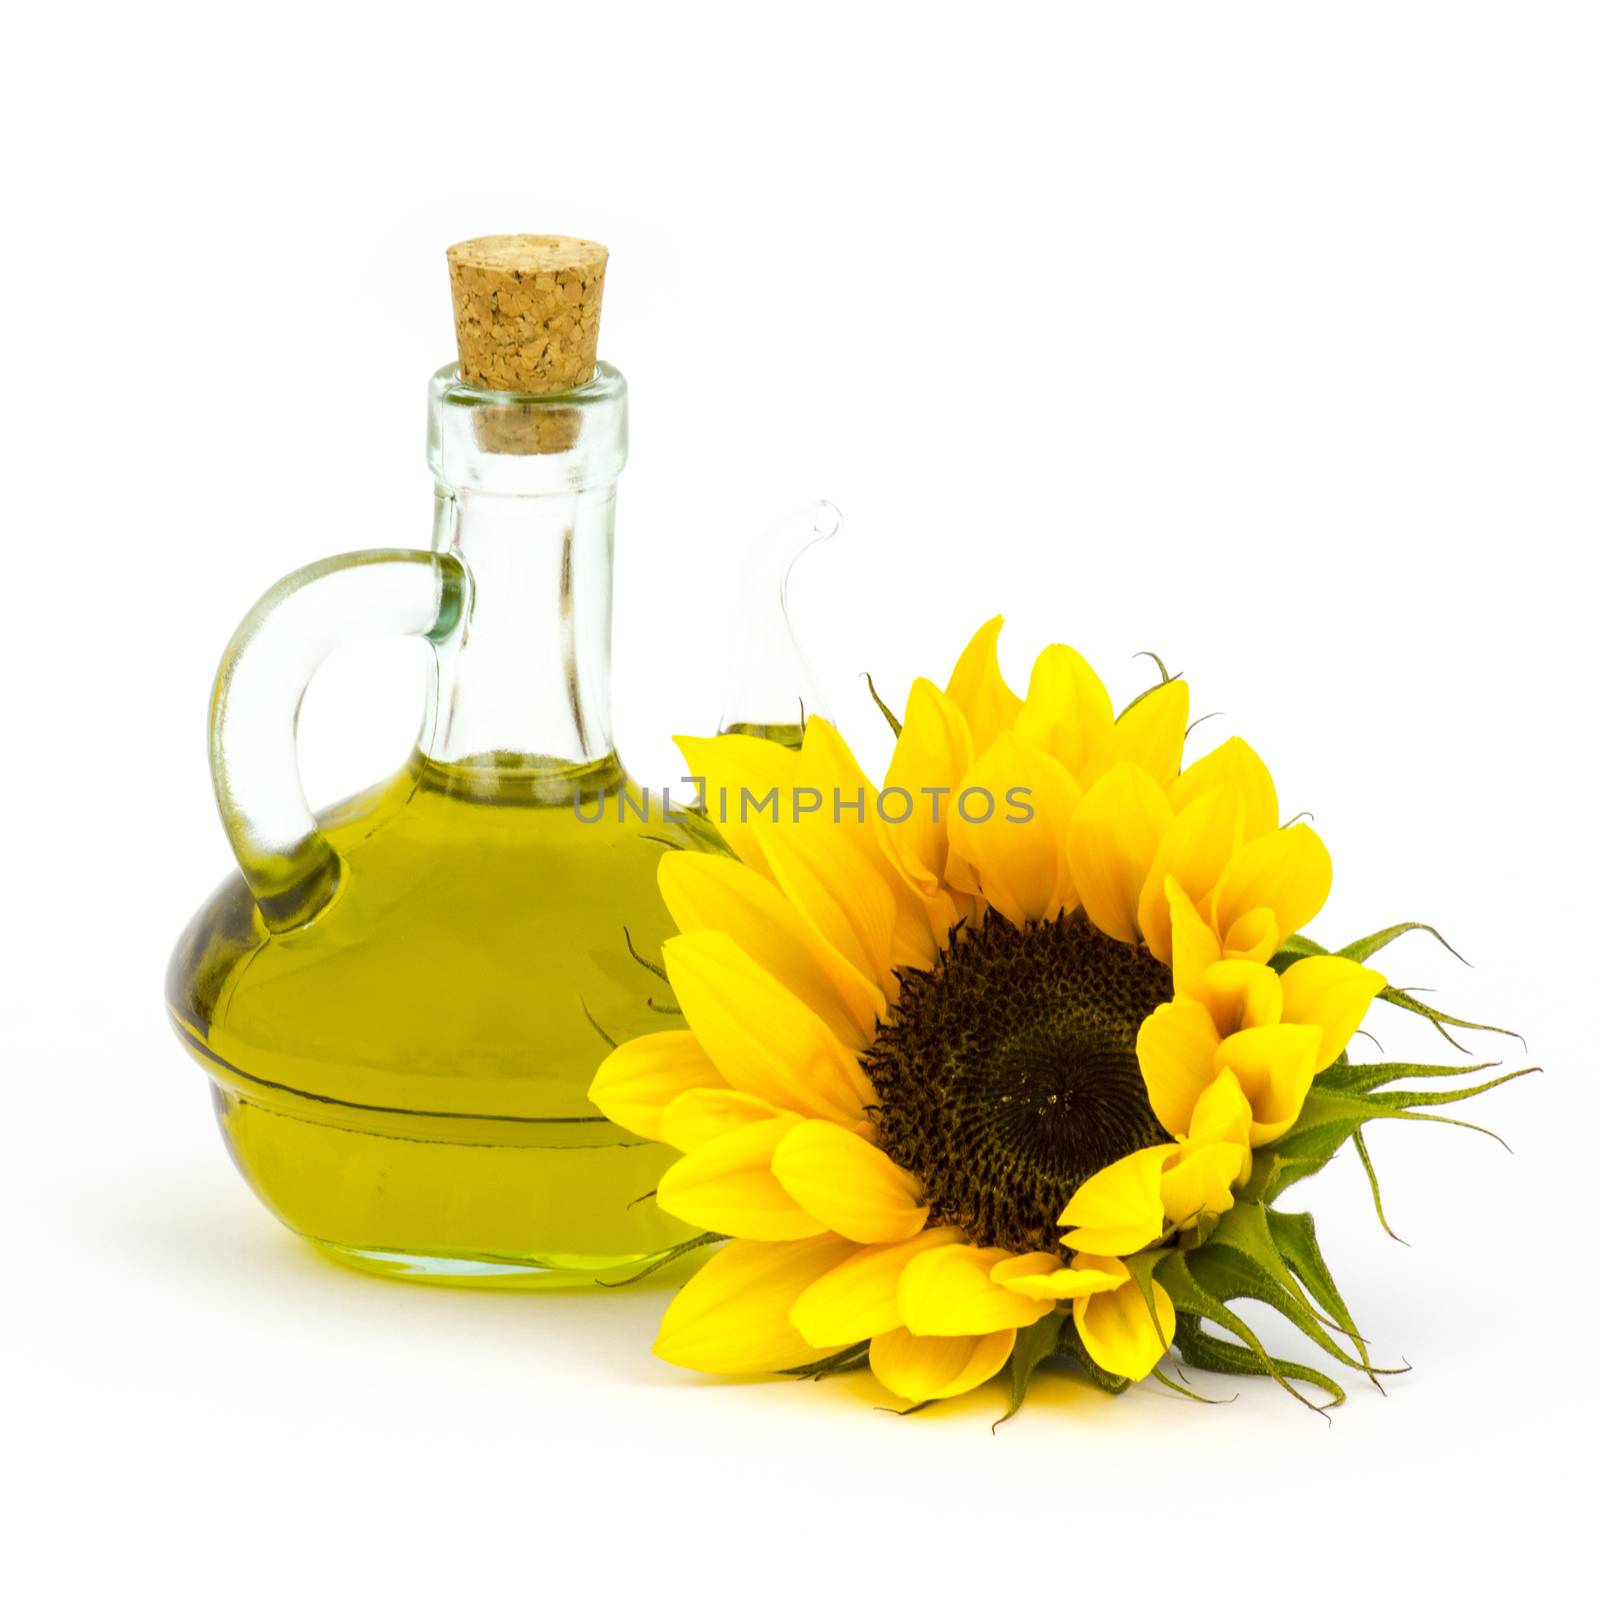 sunflower oil and sunflowers isolated on white background